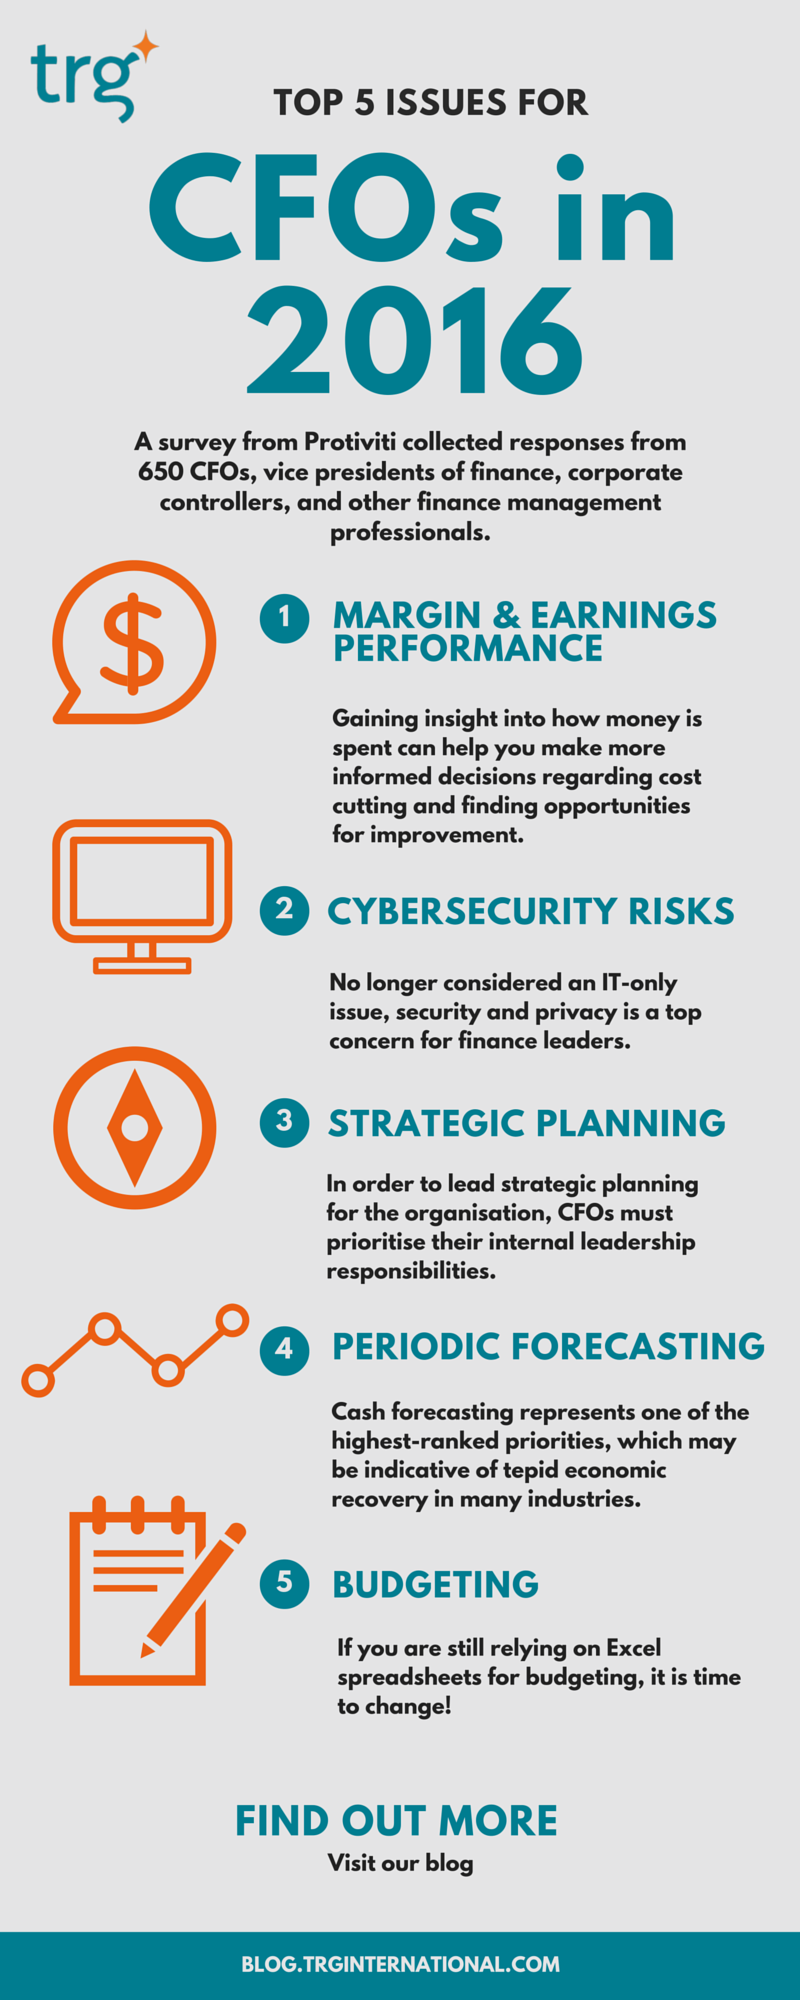 [Infographic ] Top 5 issues for CFOs in 2016